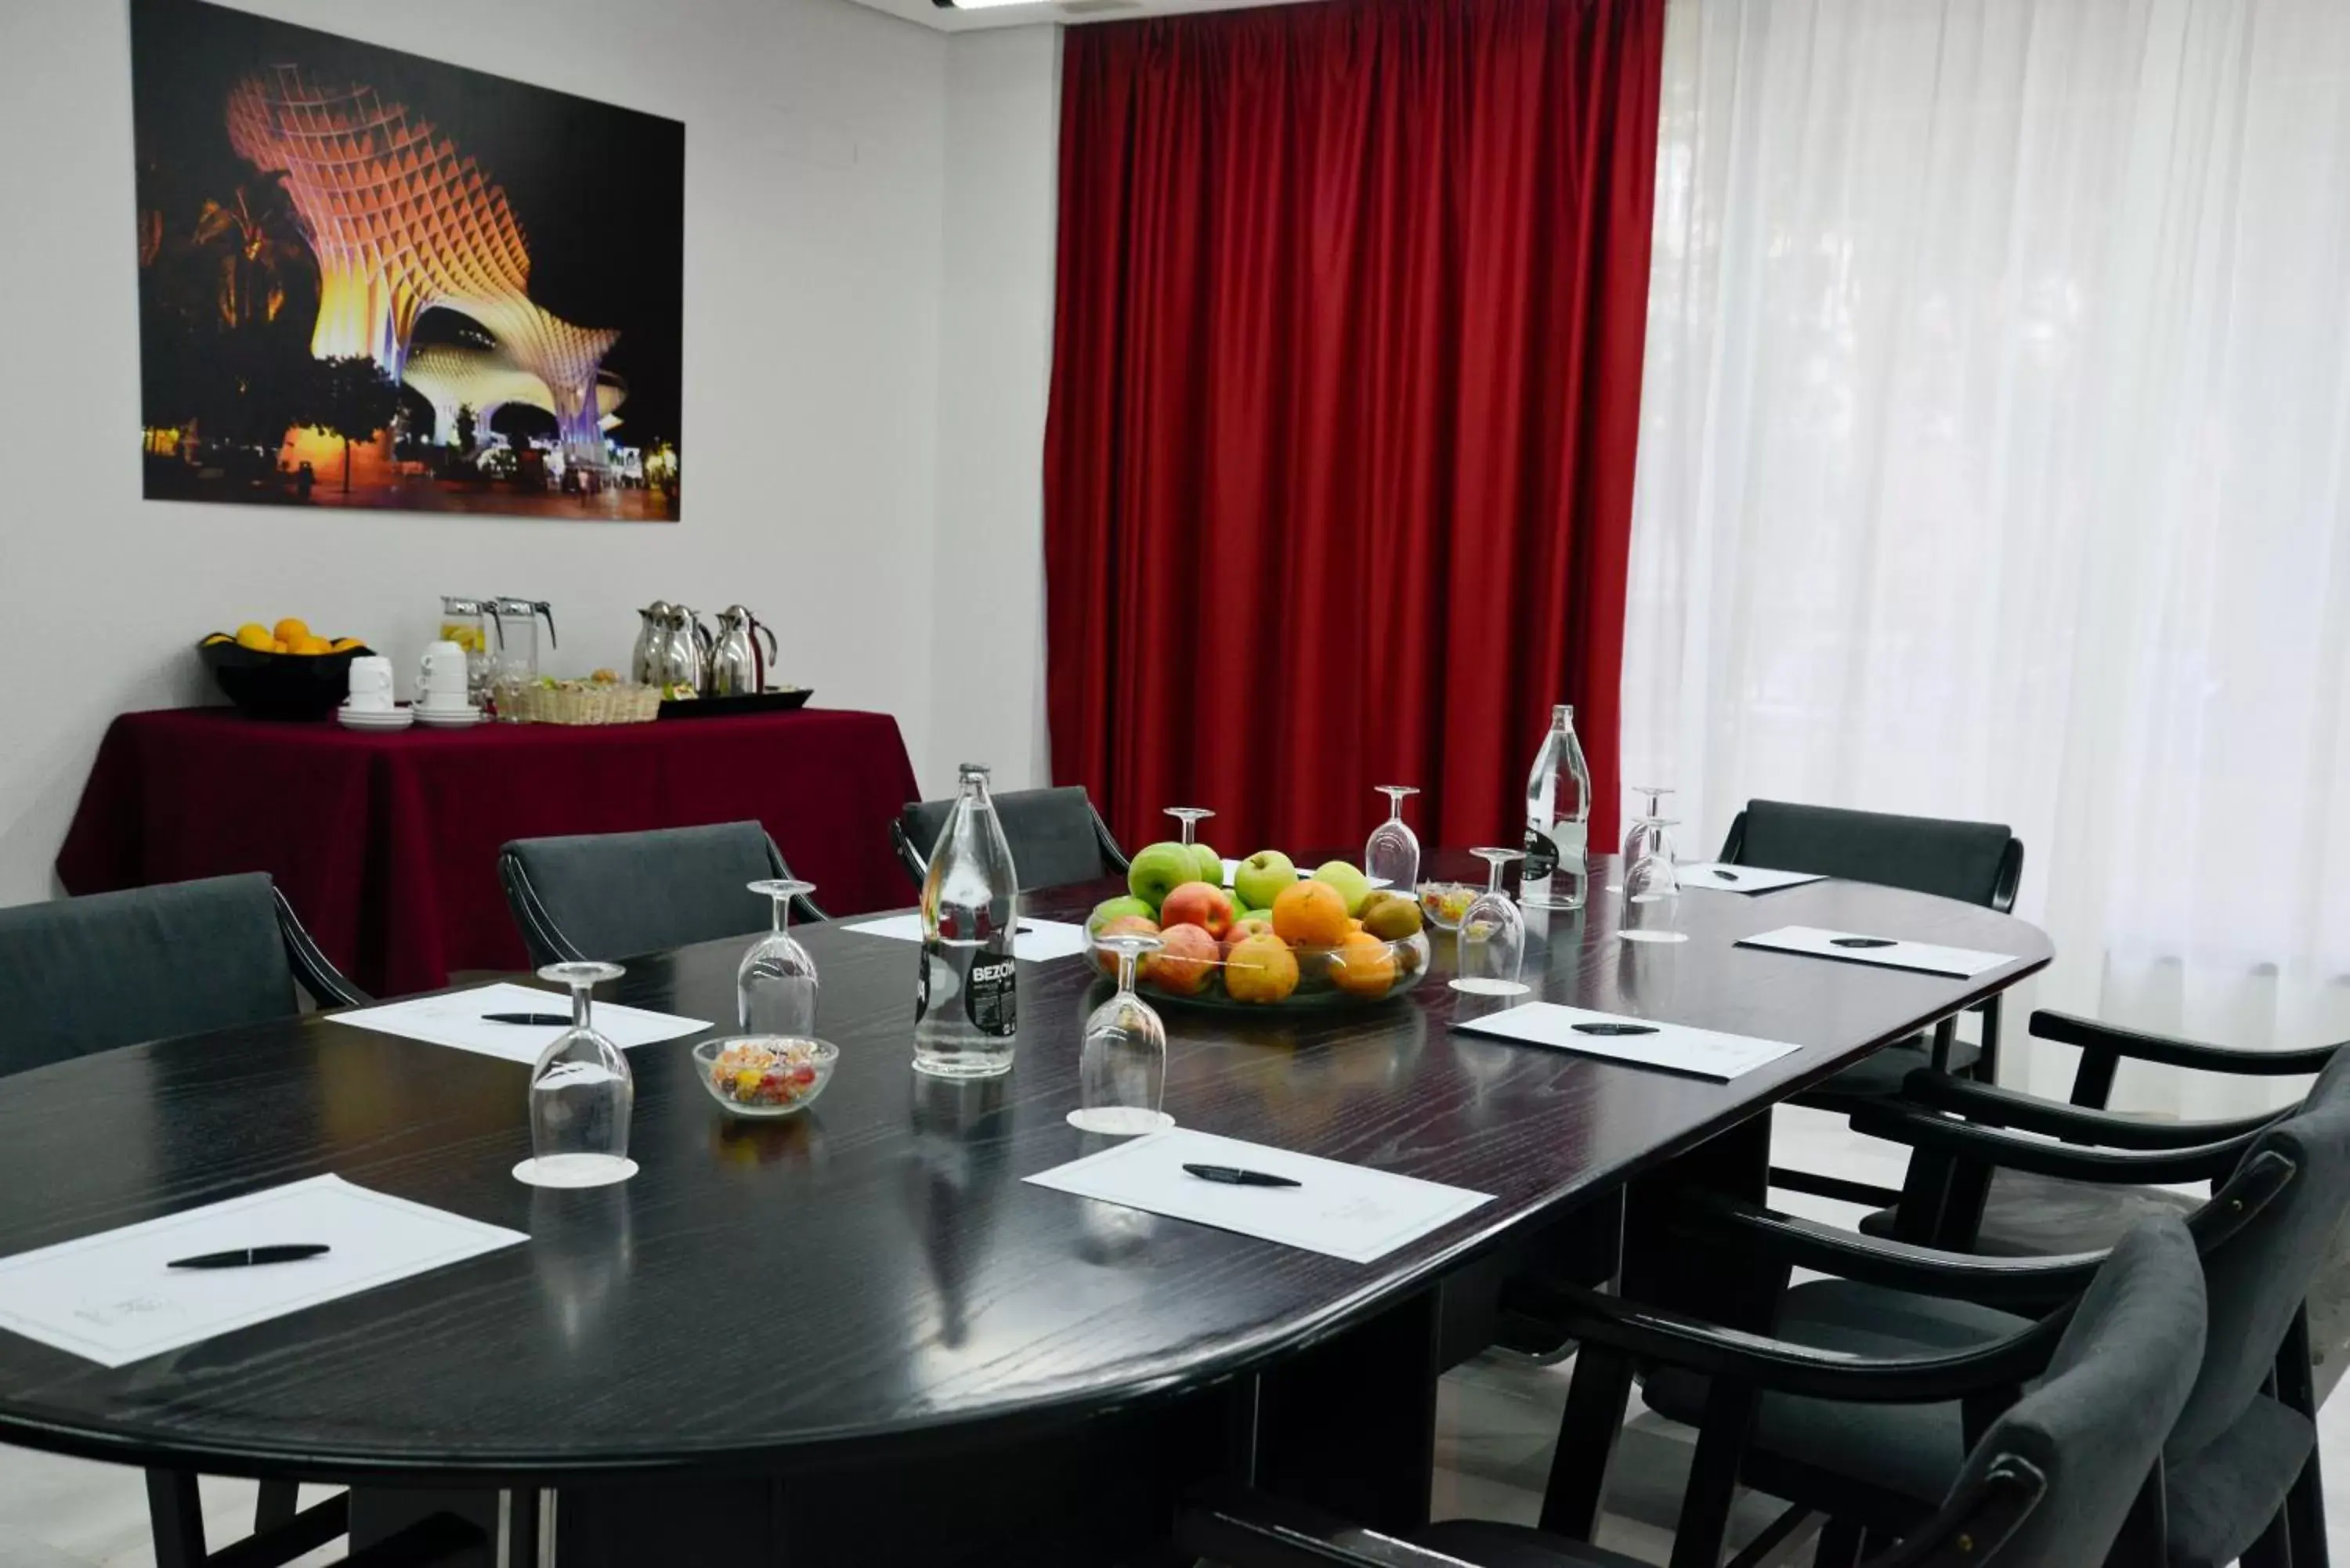 Meeting/conference room in Hotel San Pablo Sevilla